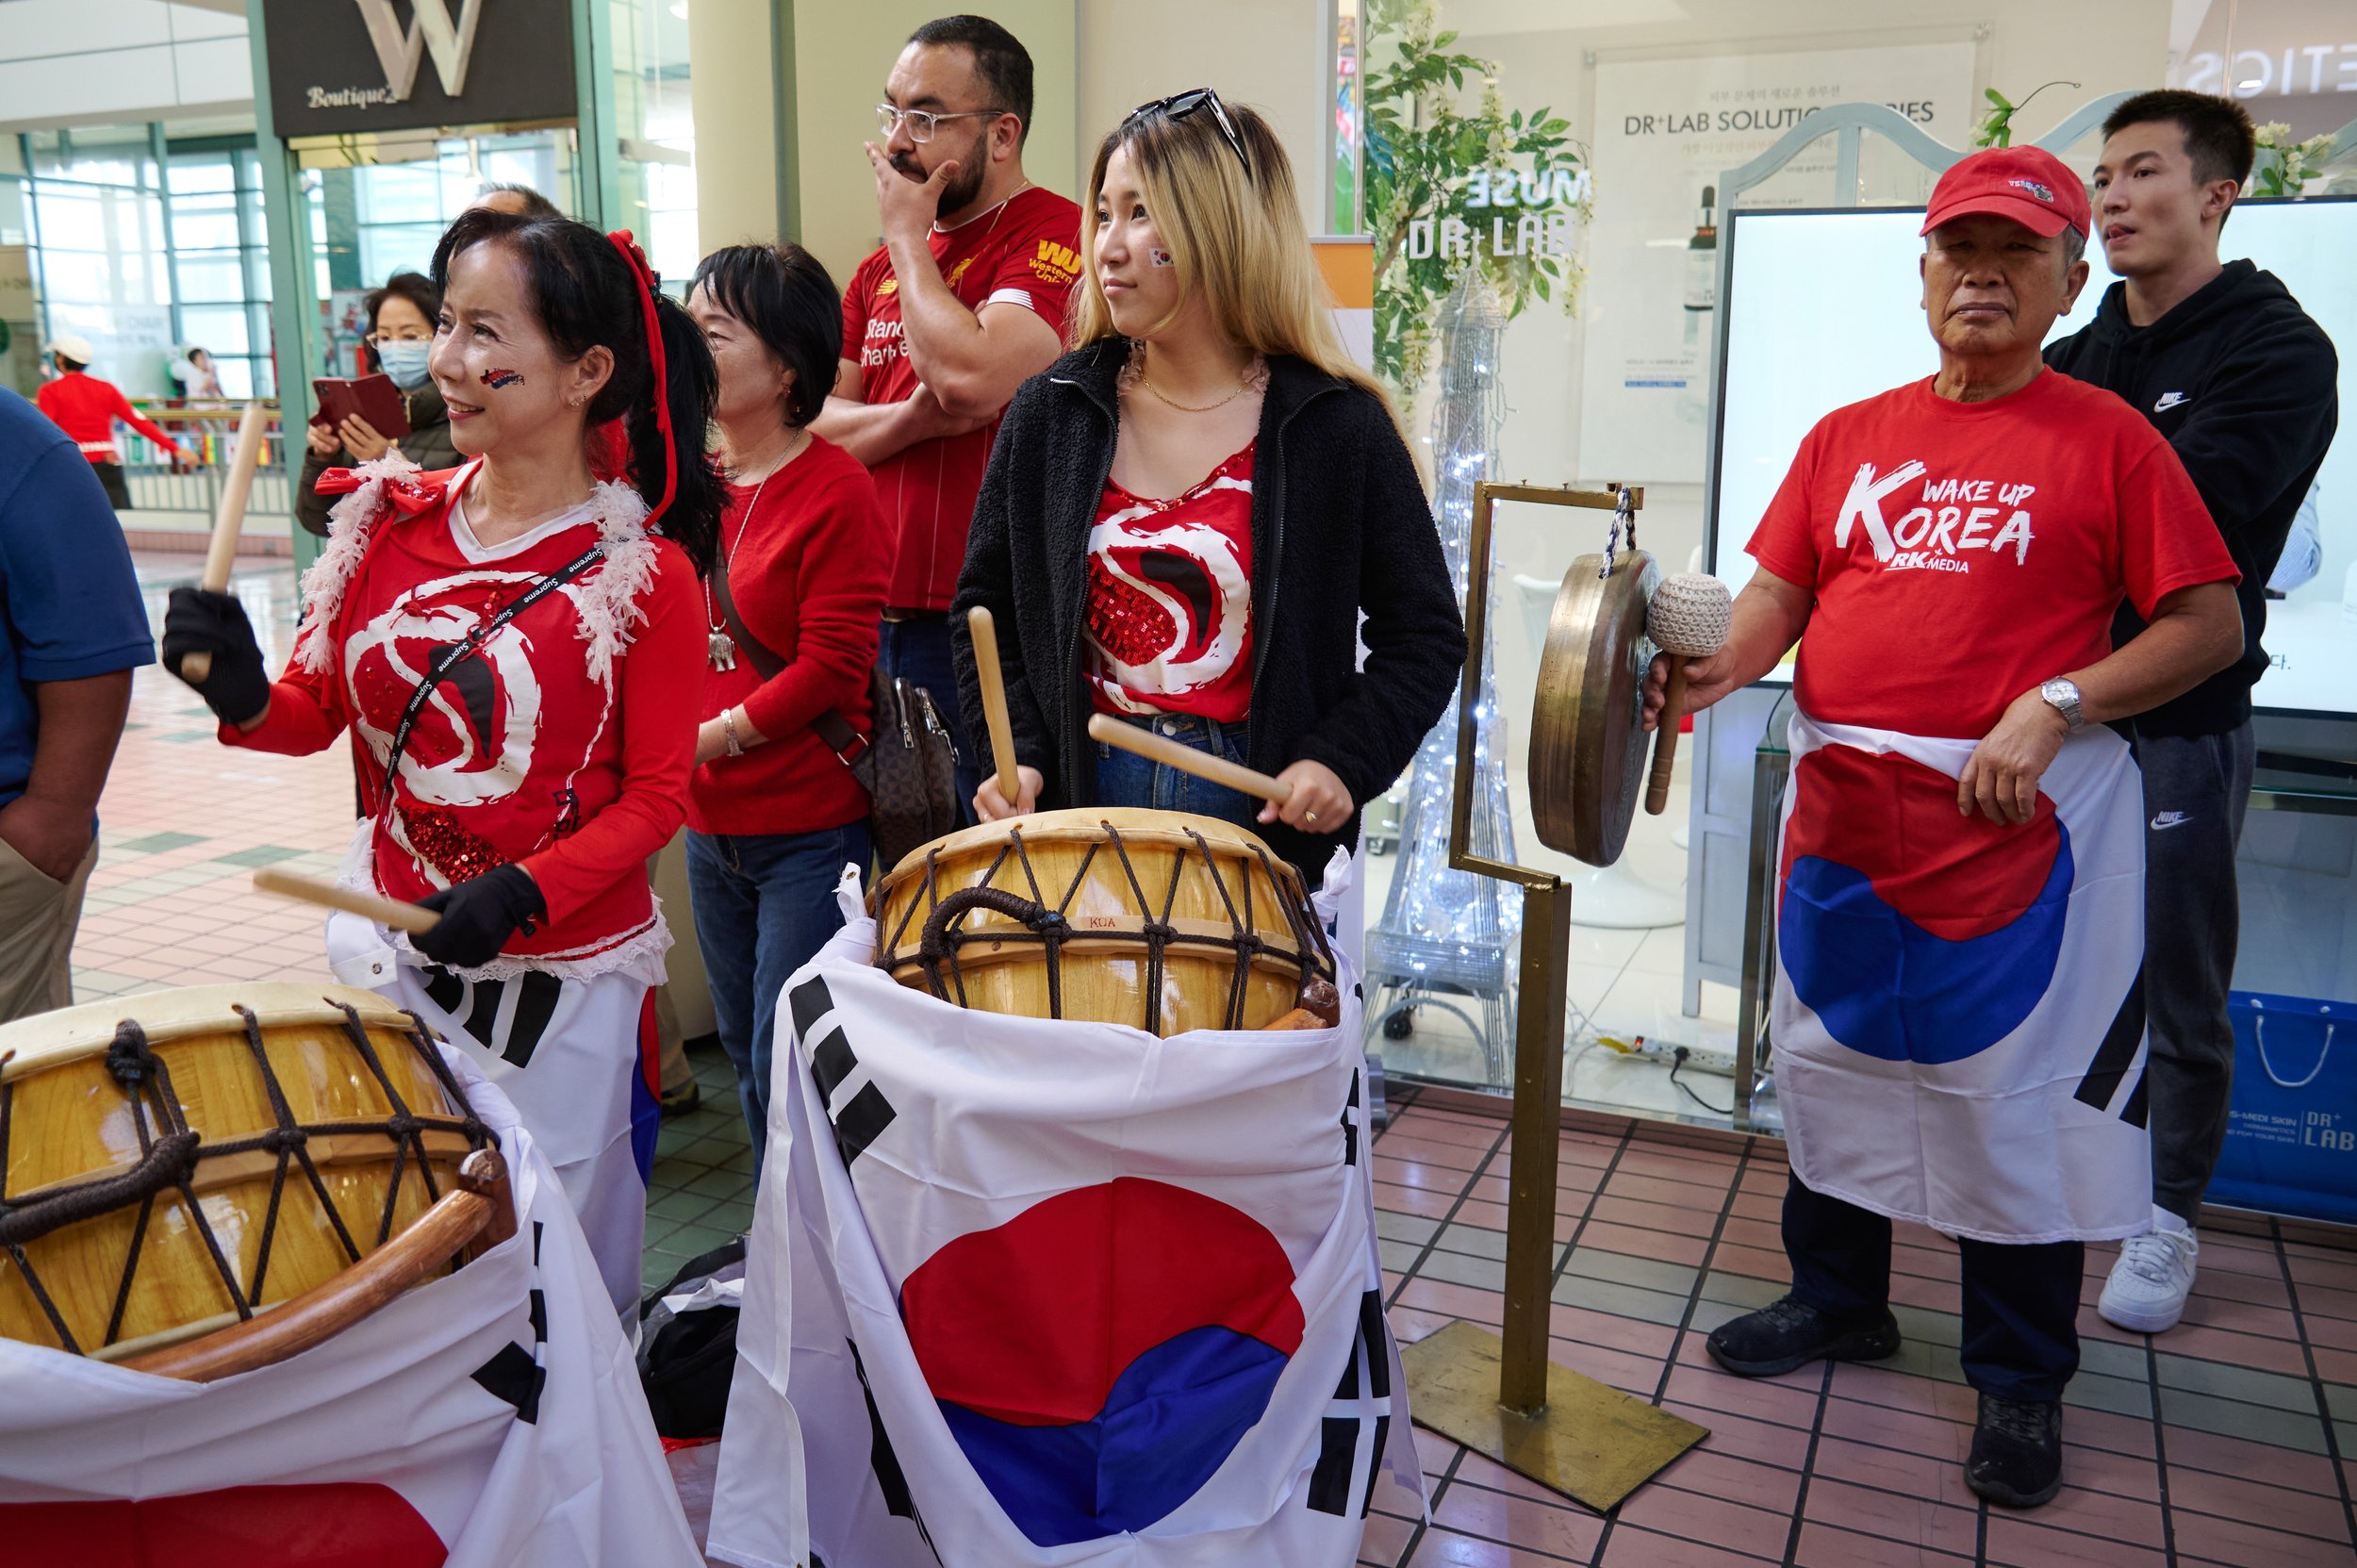  Jean Choi, Irene Choi, and Danny Shon, from Jean Ballet School, play drums and gong during the Koreatown Community World Cup Viewing Party at Koreatown Plaza on Monday, Dec. 5, 2022, in Los Angeles, Calif. (Nicholas McCall | The Corsair) 